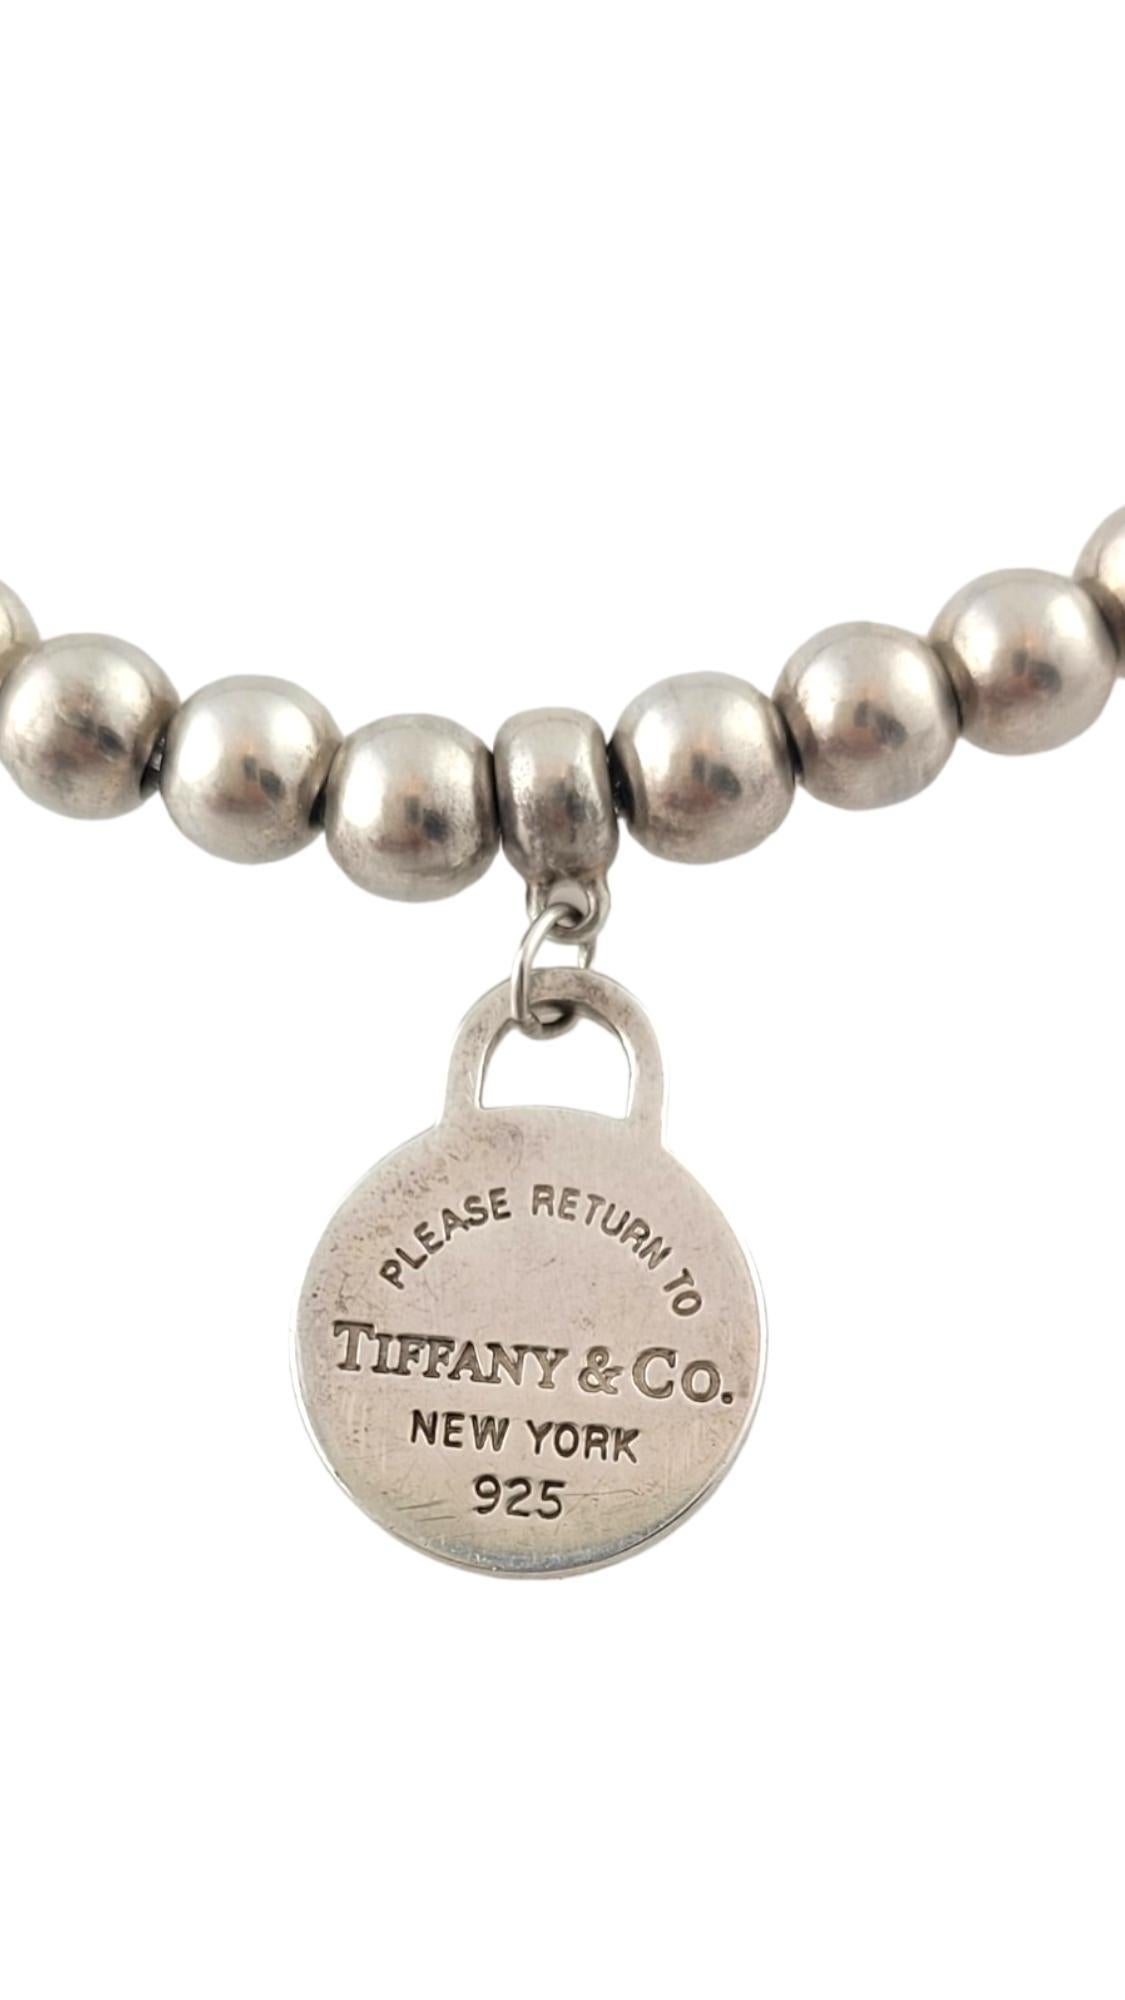 Vintage Sterling Silver Return to Tiffany Heart Tag Bead Bracelet

This gorgeous sterling silver bead bracelet by designer Tiffany & Co. features a 